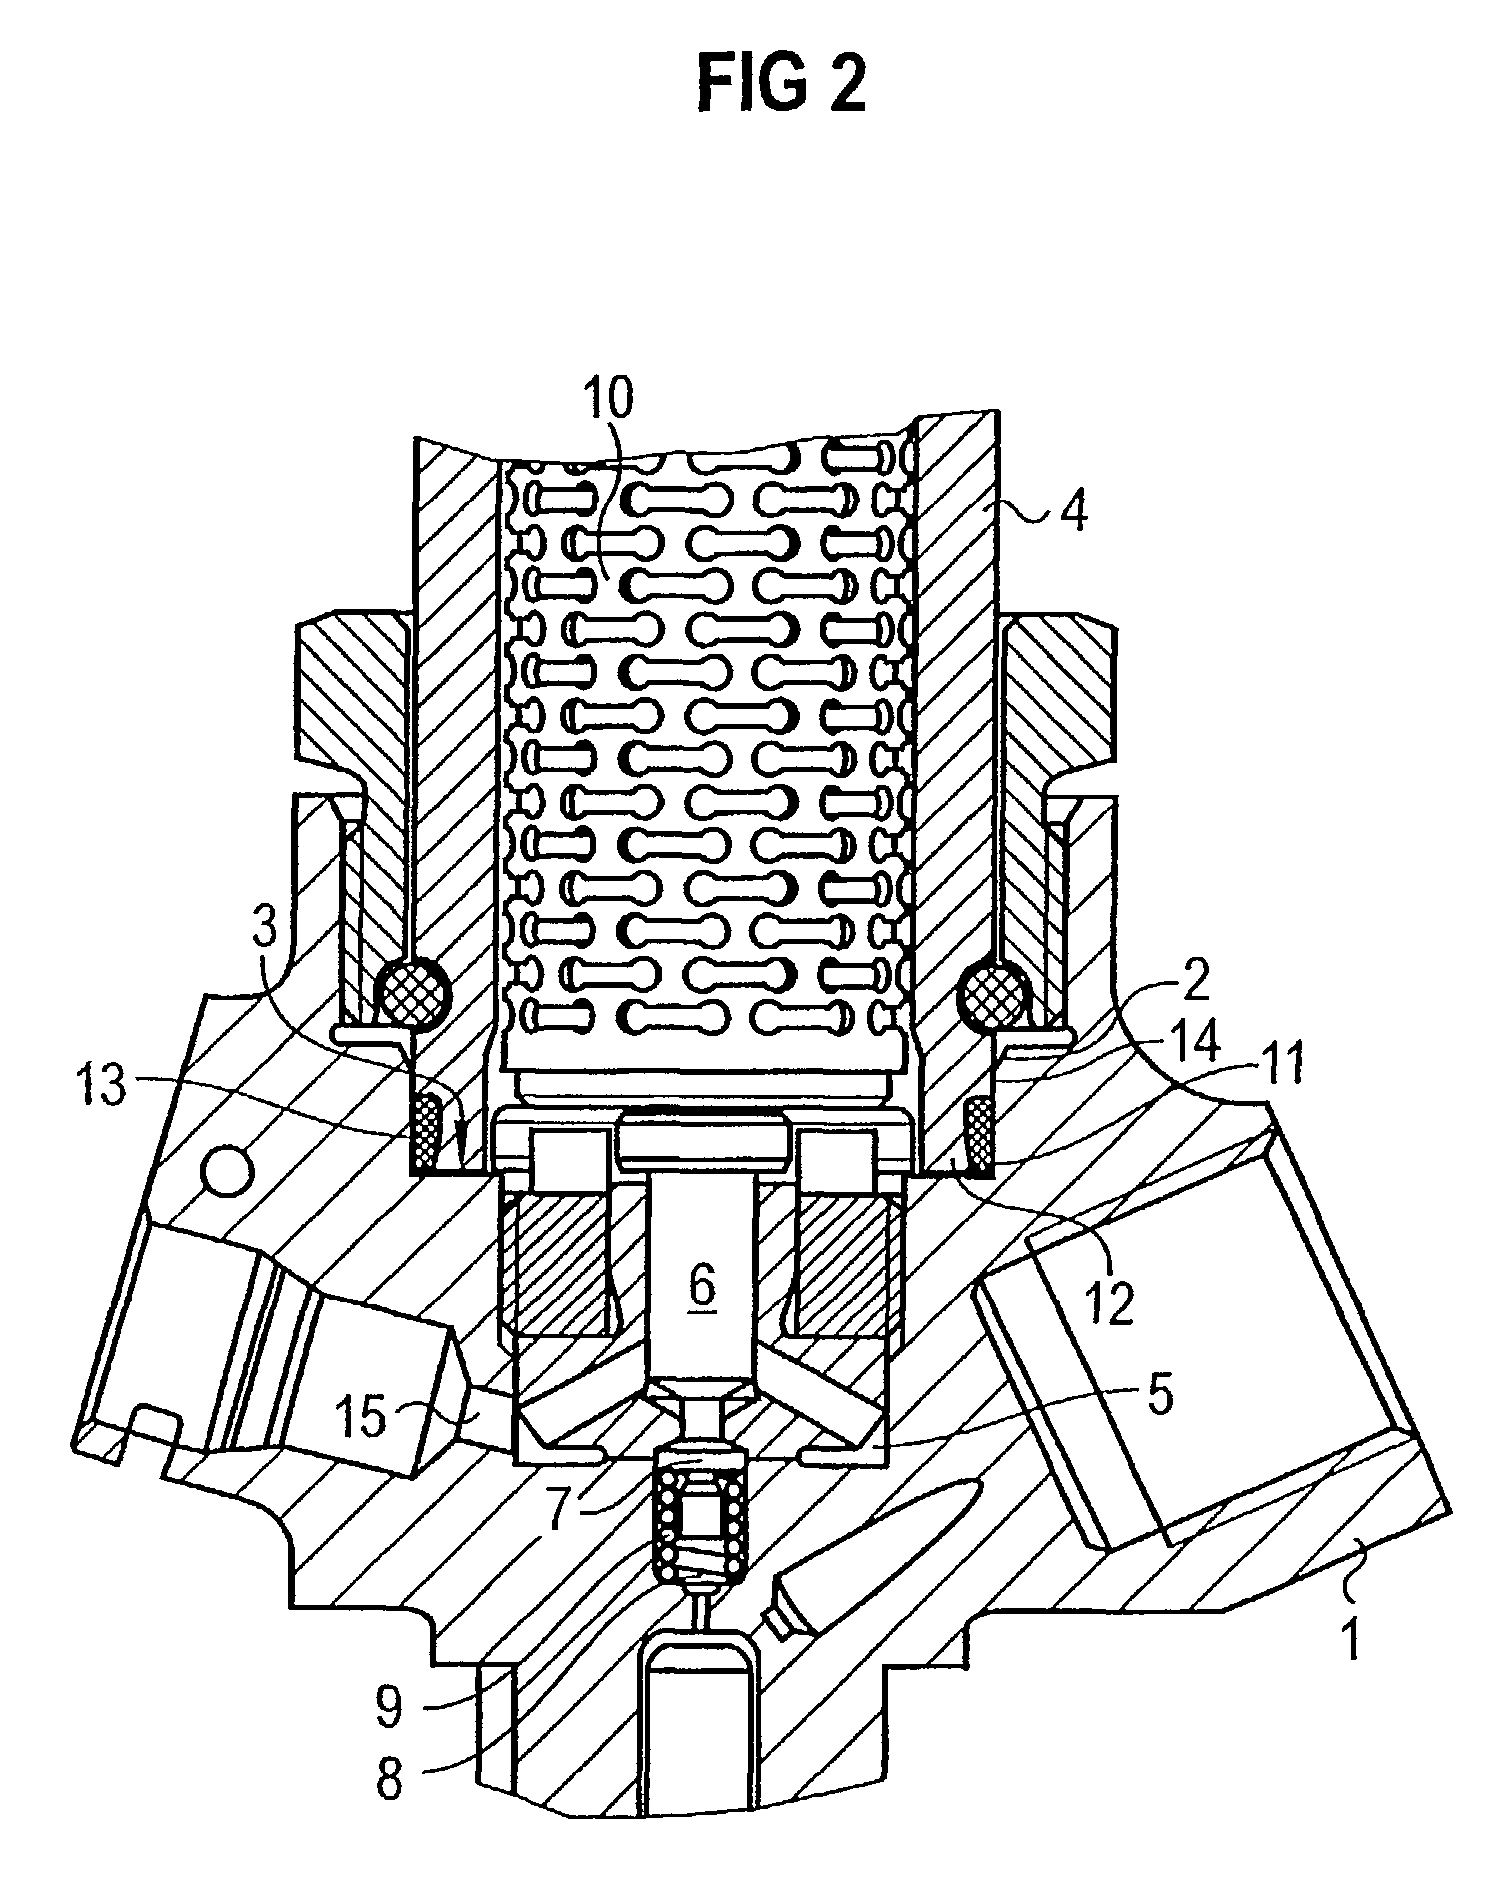 Injector to inject fuel into a combustion chamber